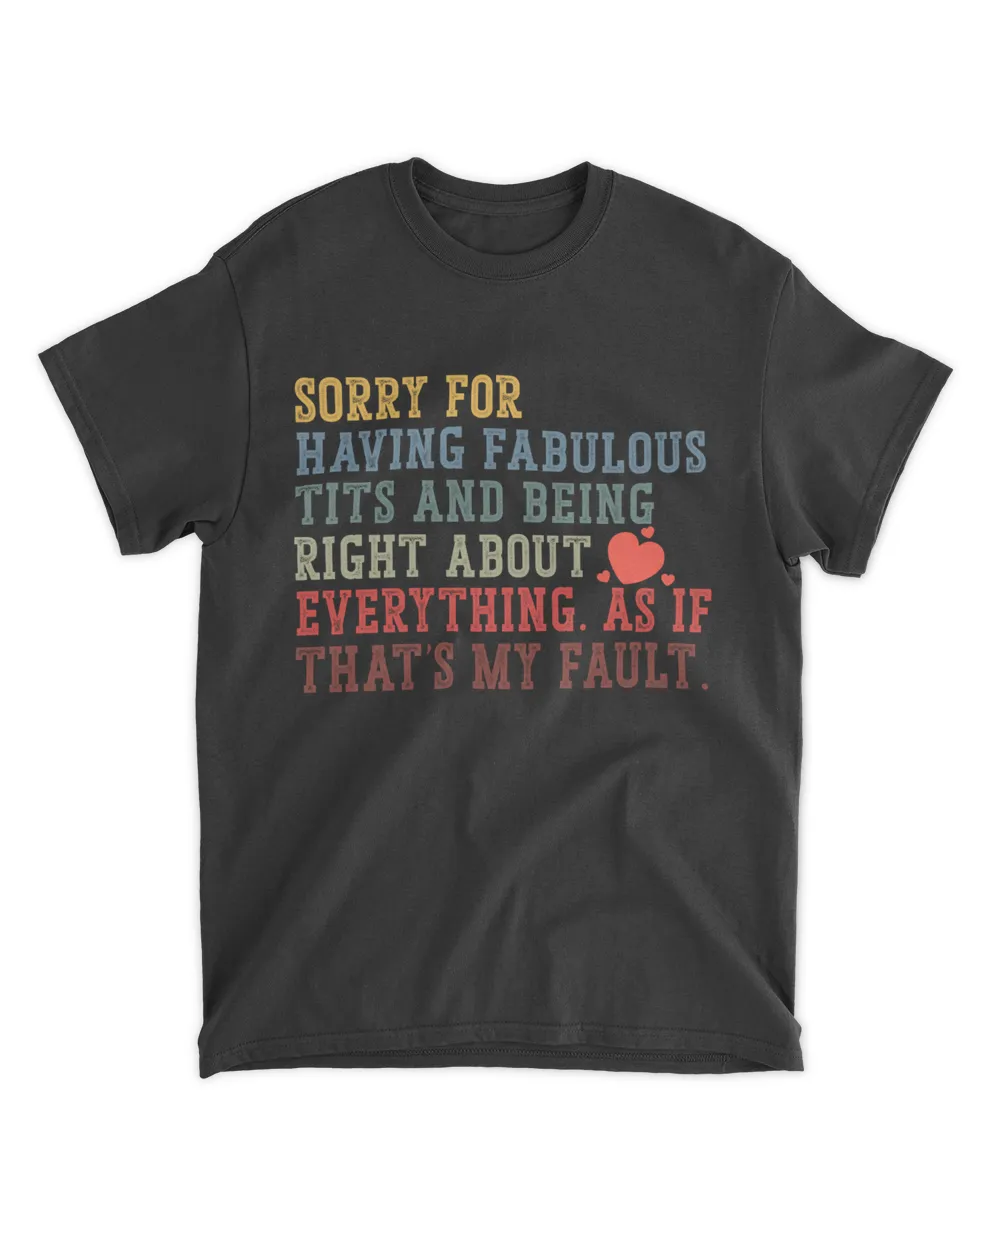 Sorry for having fabulous tits and being right about everything as if that’s my fault Shirt